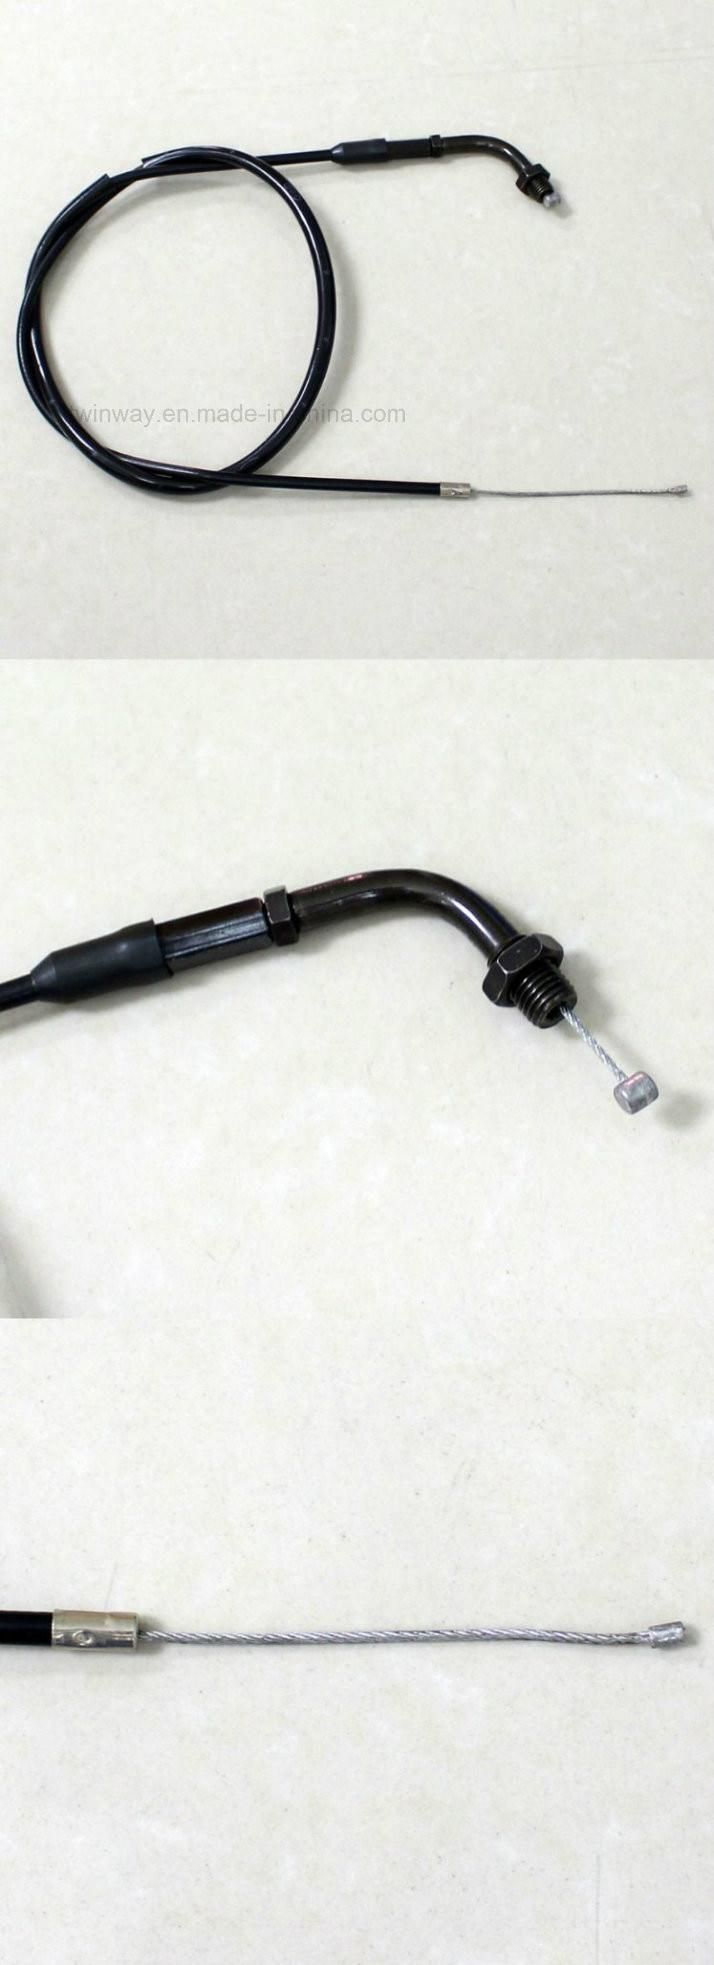 OEM Motorcycle Throttle Cable Wire Motorcycle Parts